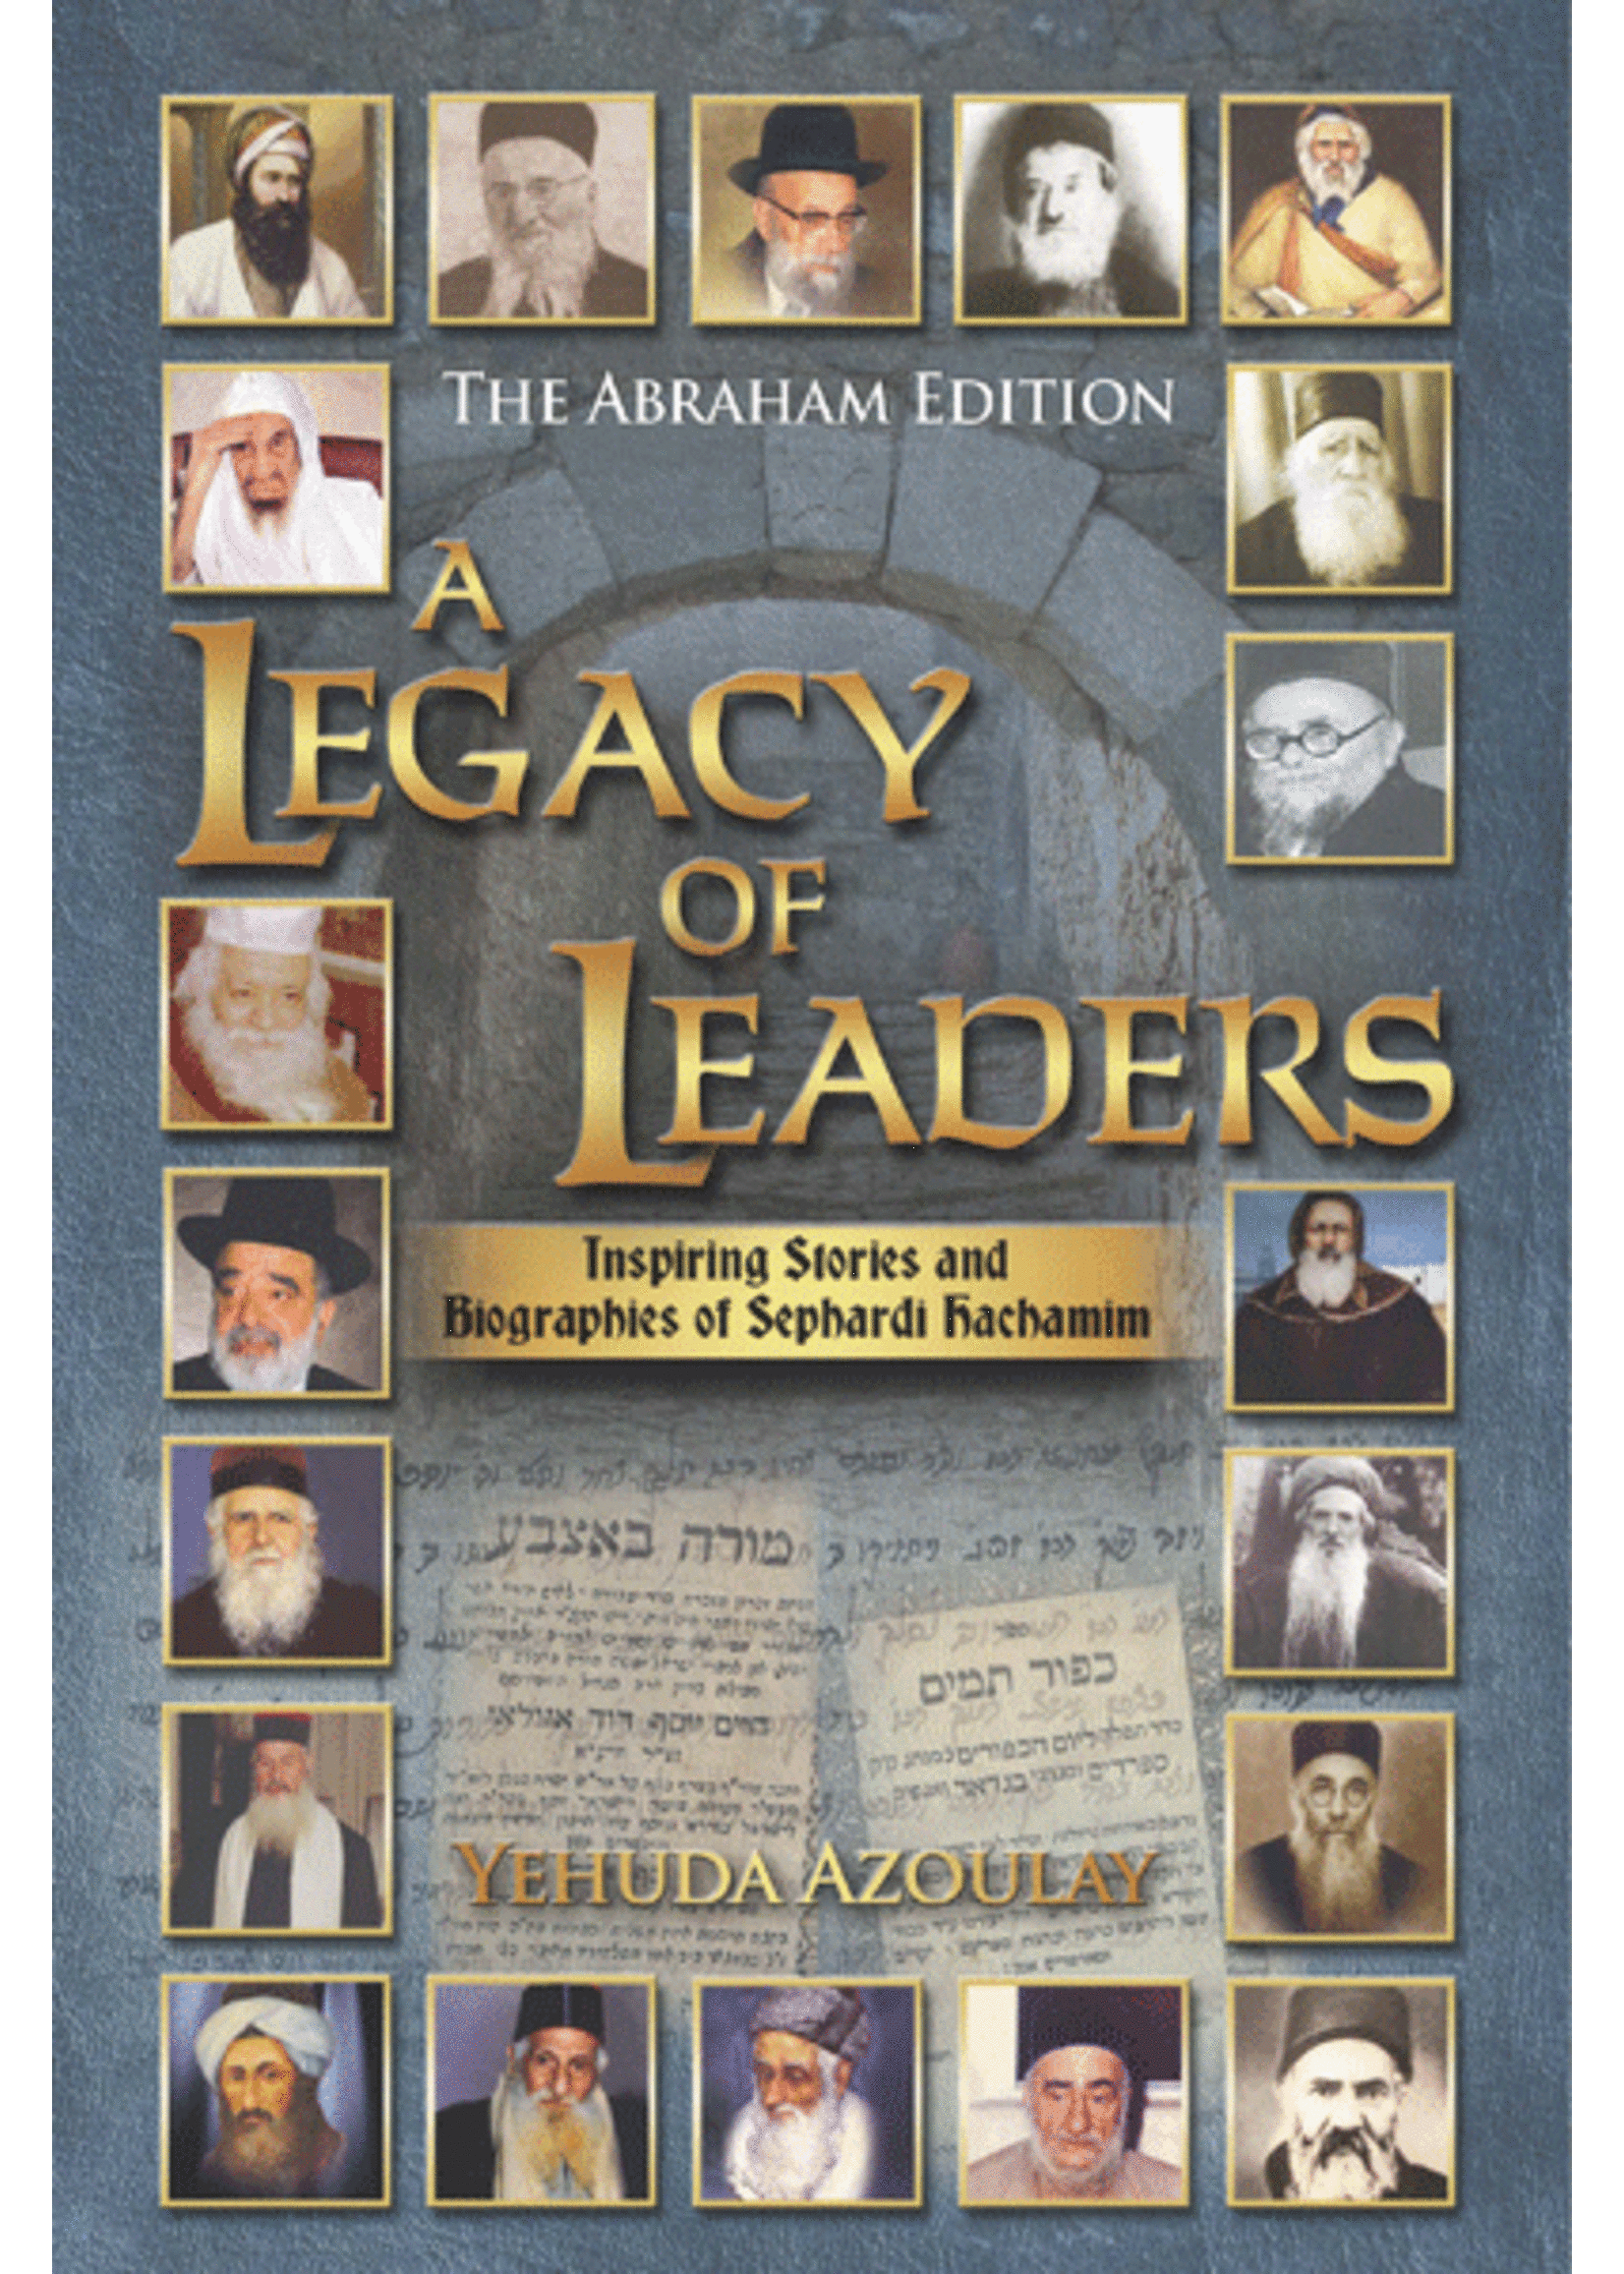 A LEGACY OF LEADERS